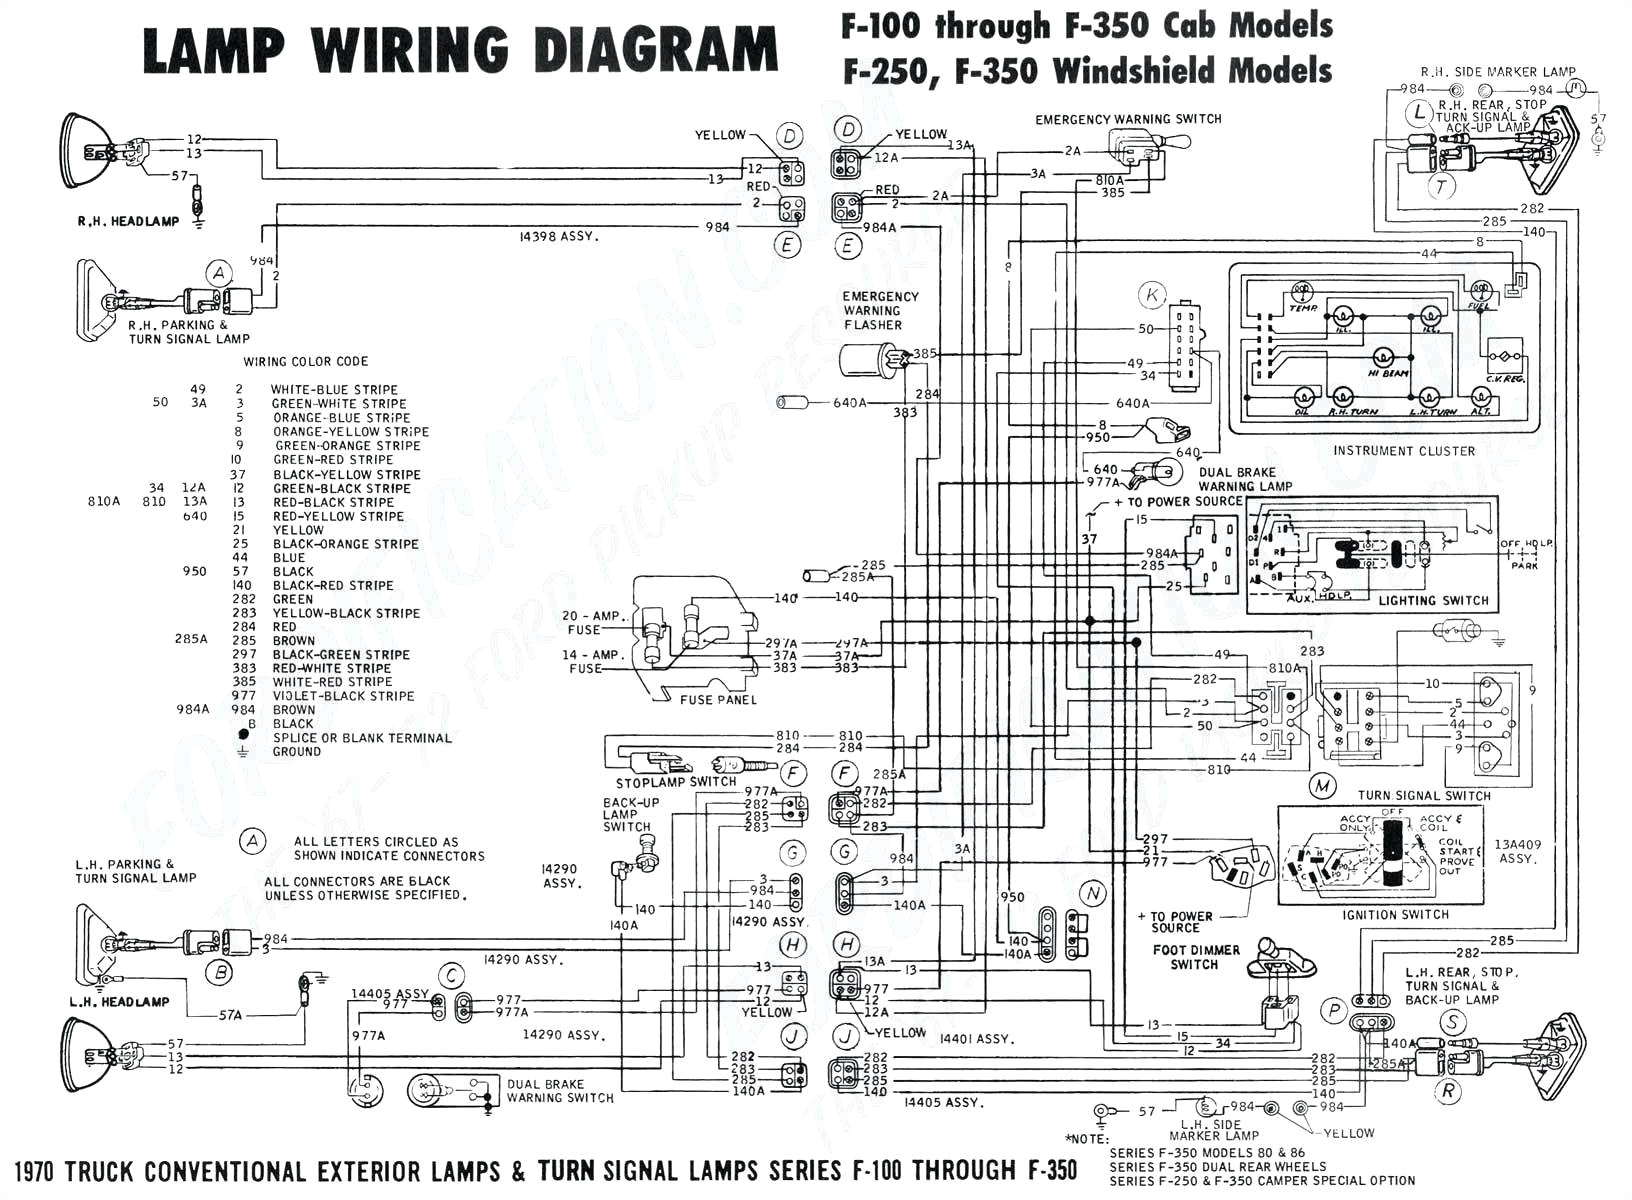 Wiring Diagram for Tractor Lights Farm Trailer Wiring Diagram Blog Wiring Diagram